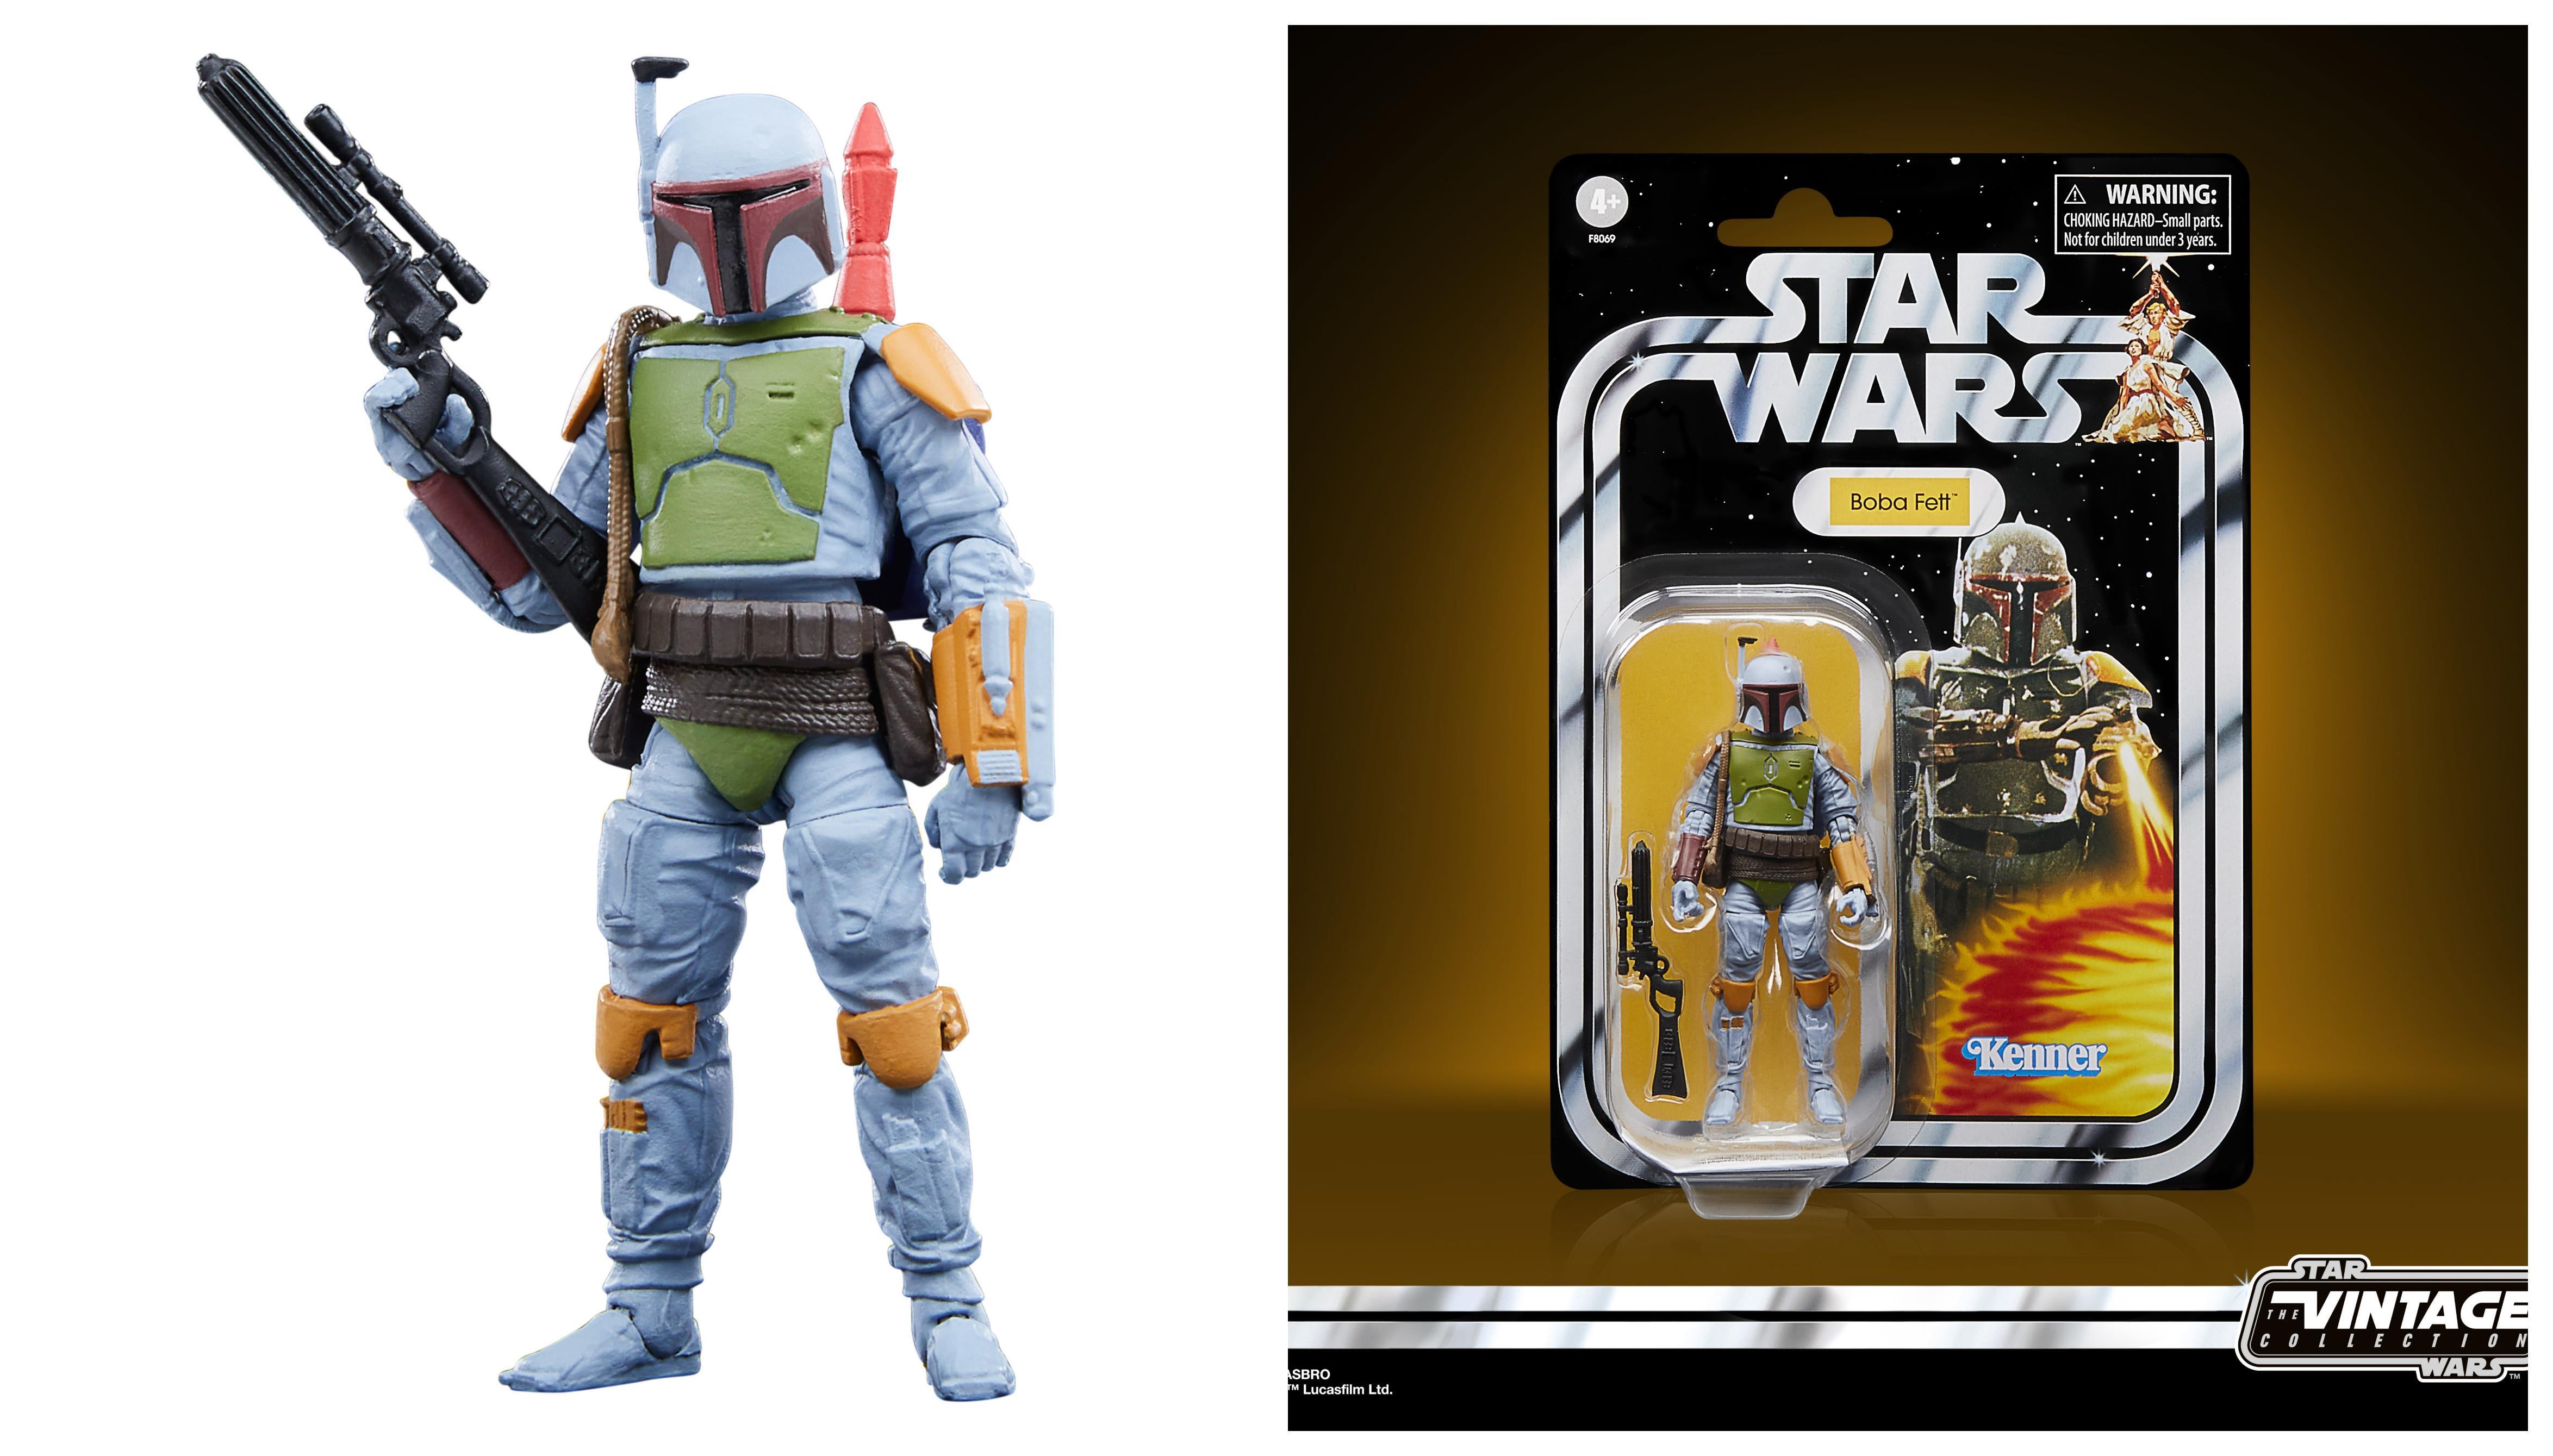 Star Wars Mandalorian Action Figures for sale in Boston